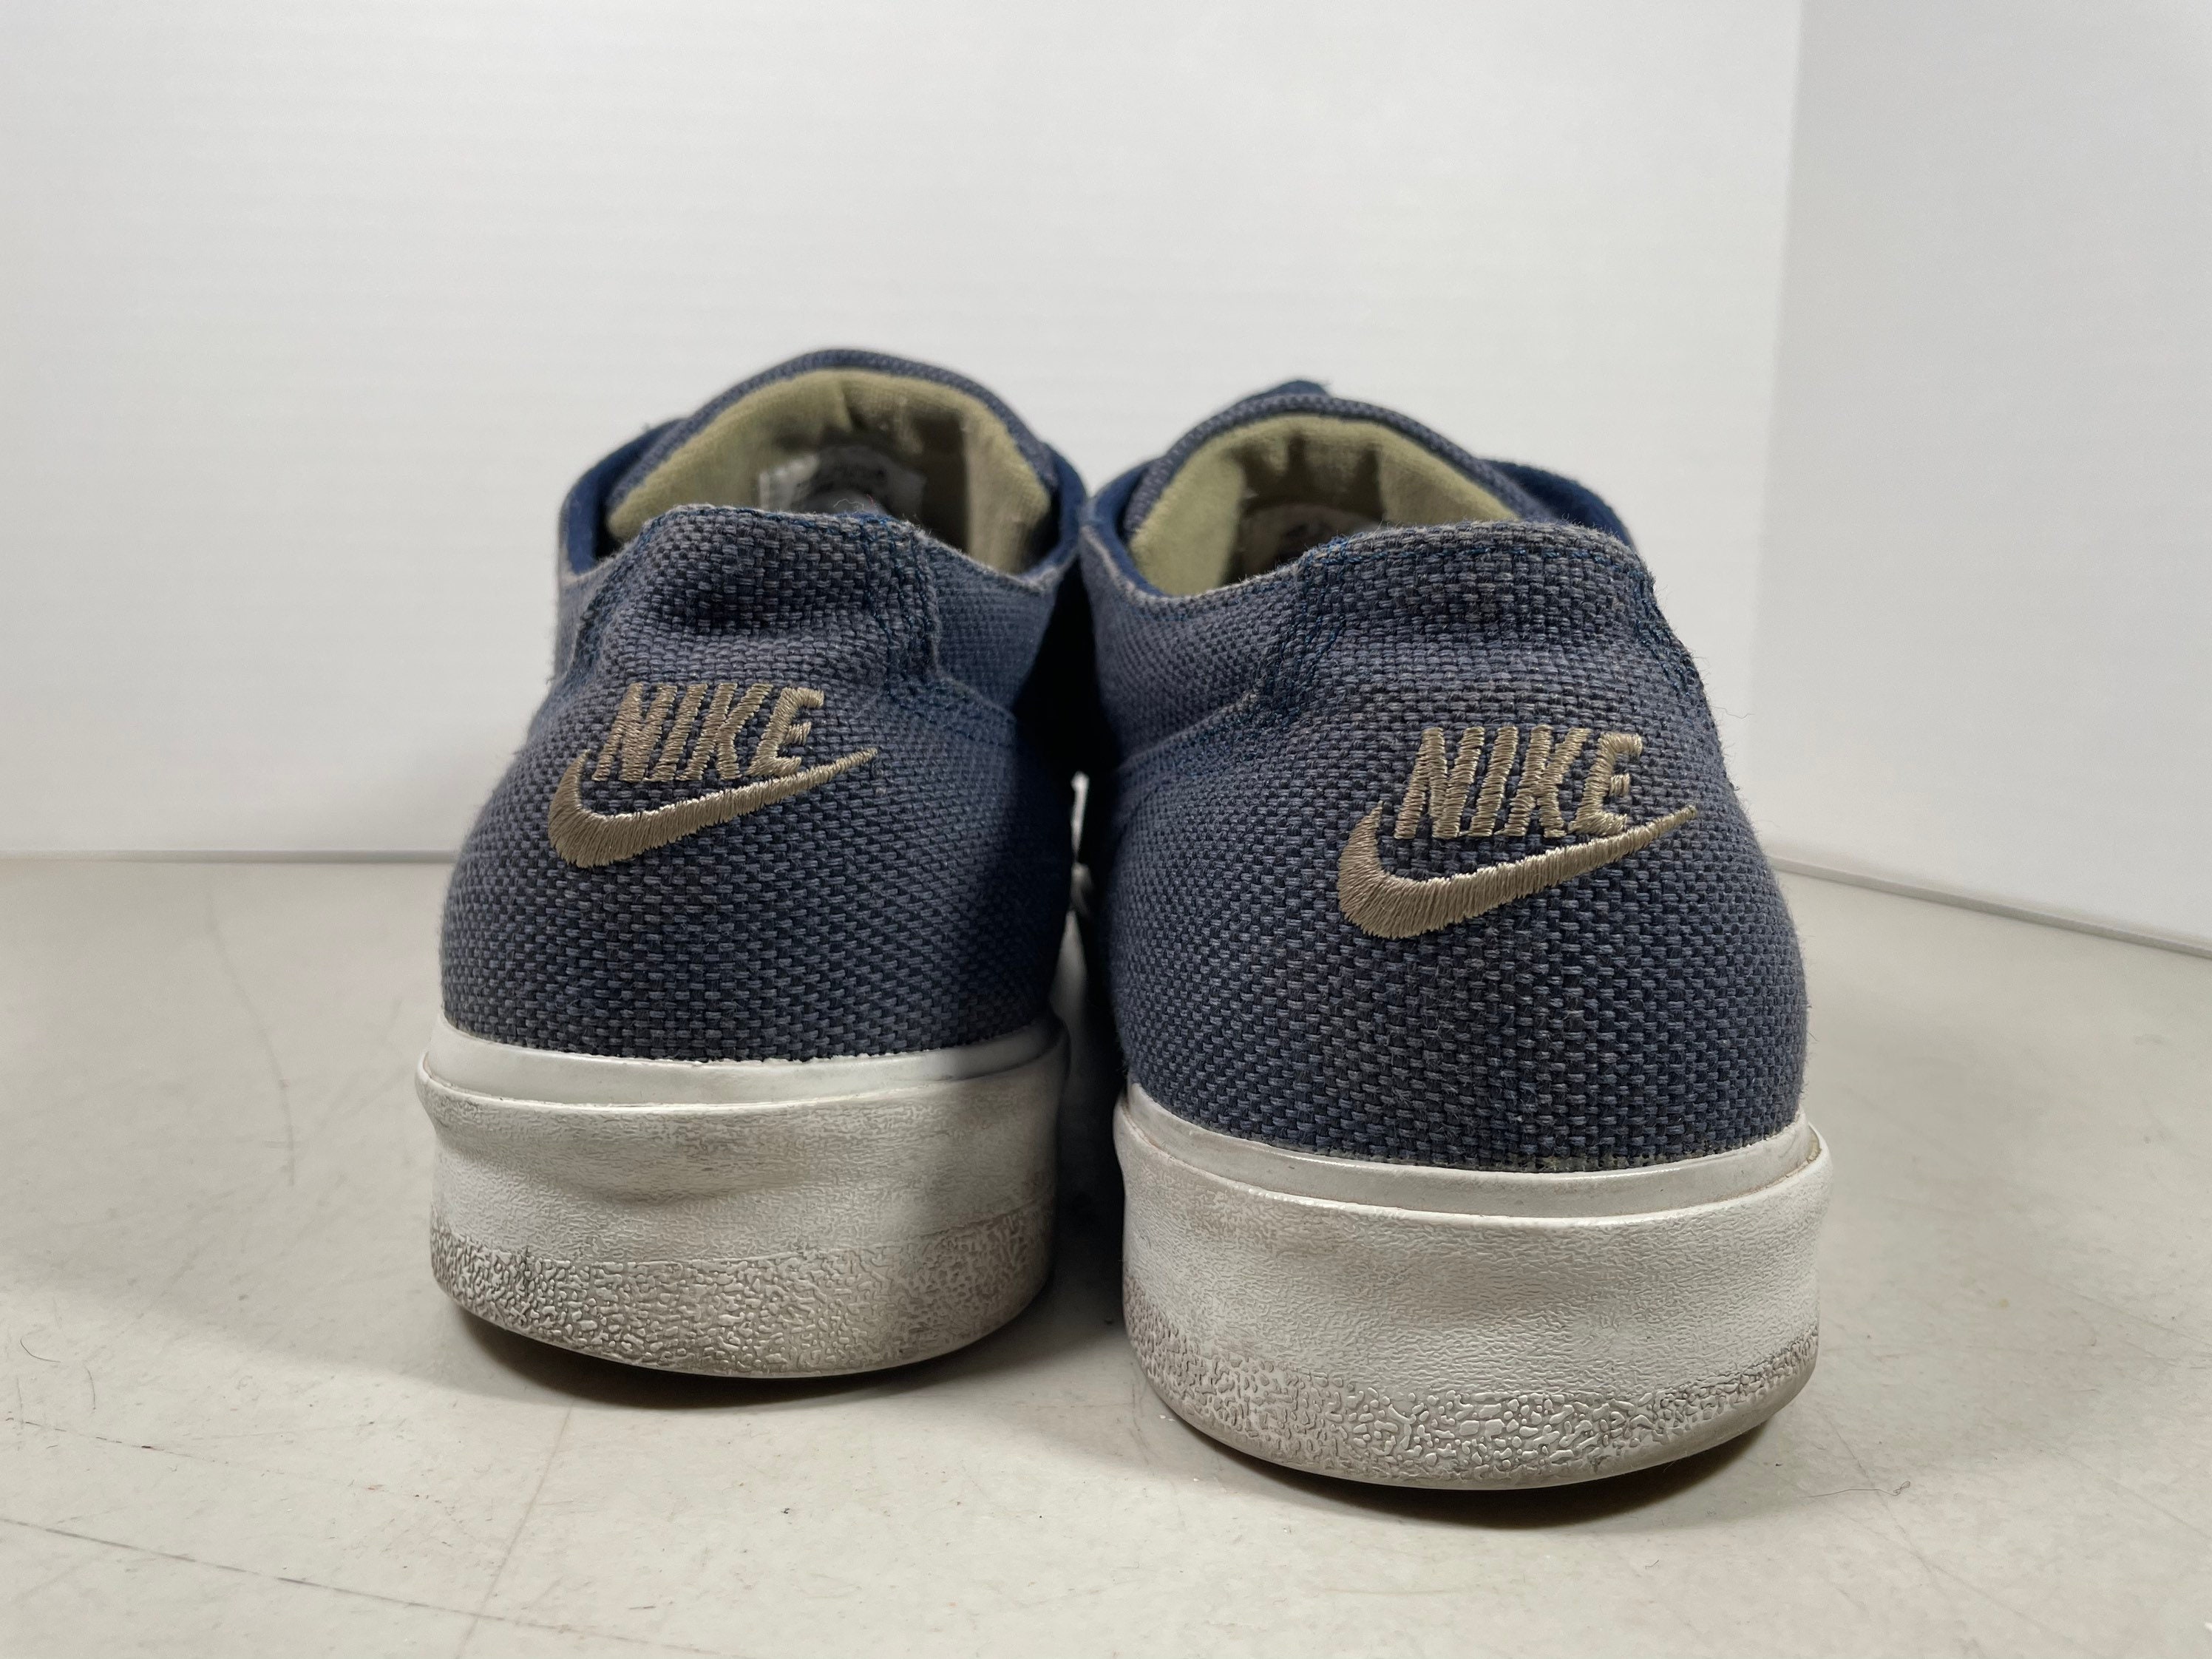 NIKE All Court 2 Canvas Sneakers Footwear Shoes 7.5UK Retro Vintage Style,  Men's Fashion, Footwear, Sneakers on Carousell